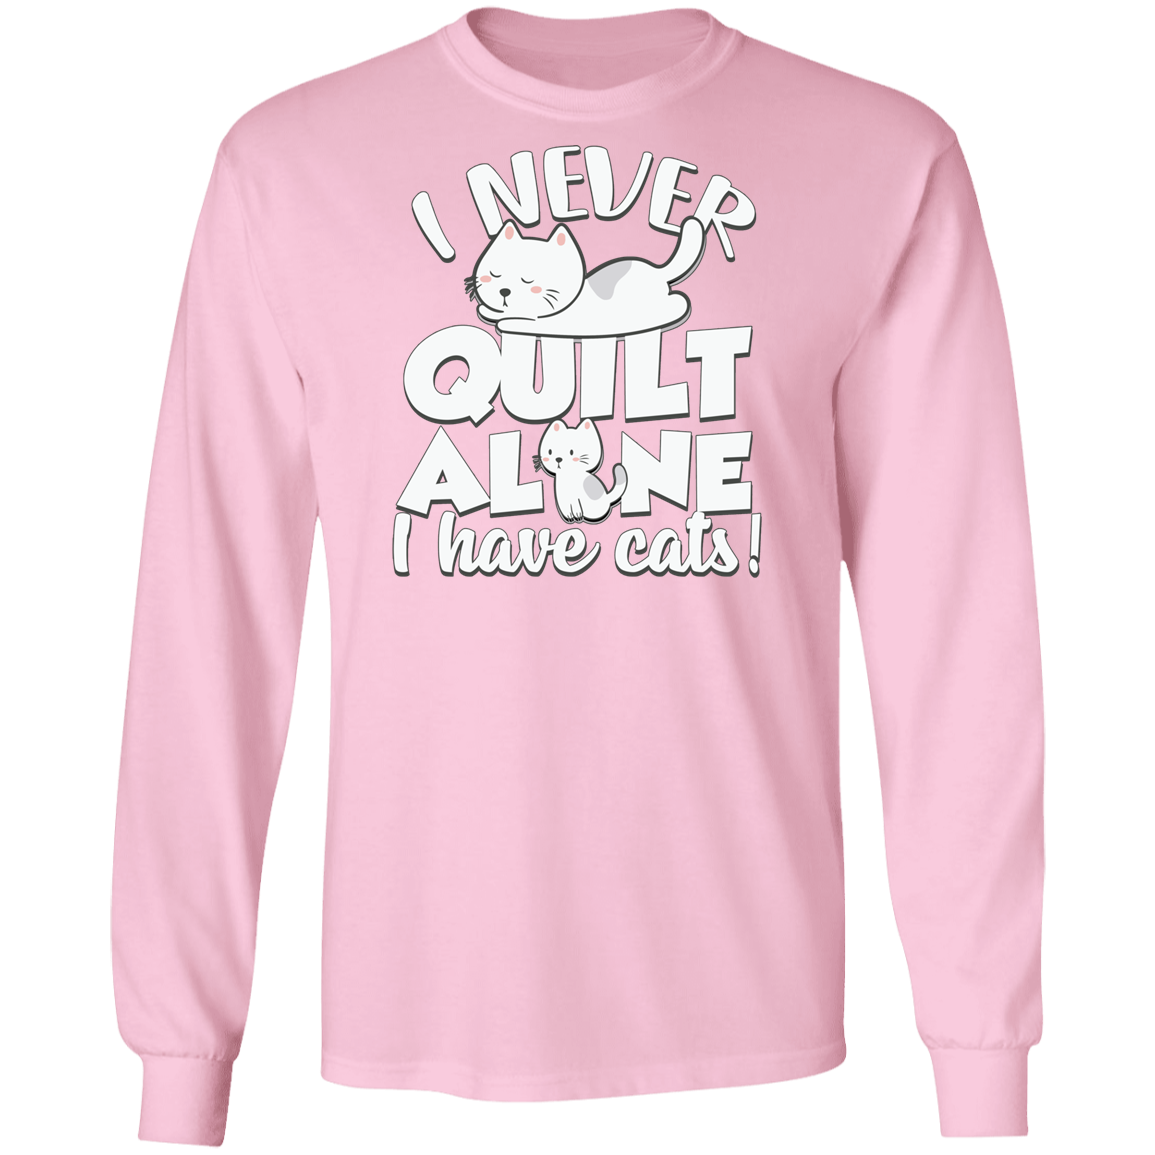 I Never Quilt Alone - I Have Cats! LS Ultra Cotton T-Shirt